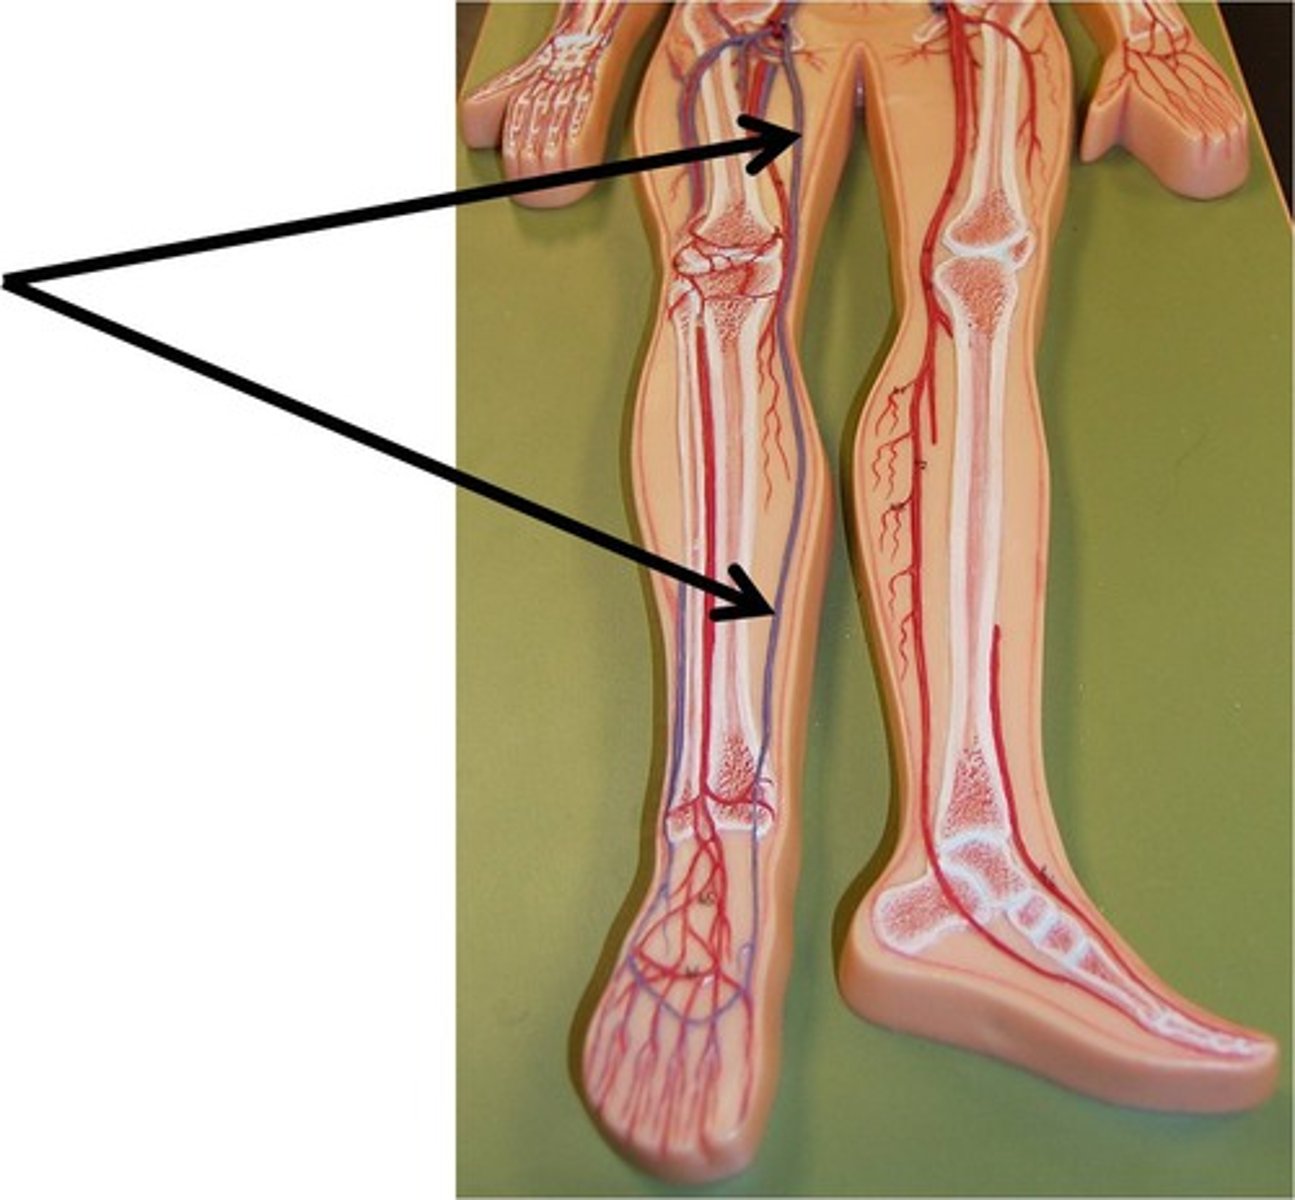 <p>The longest veins in the body. They receive the superficial drainage of the leg. They begin at the dorsal venous arch in the foot and travel up to the medial aspect of the leg to empty into the femoral vein in the thigh</p>